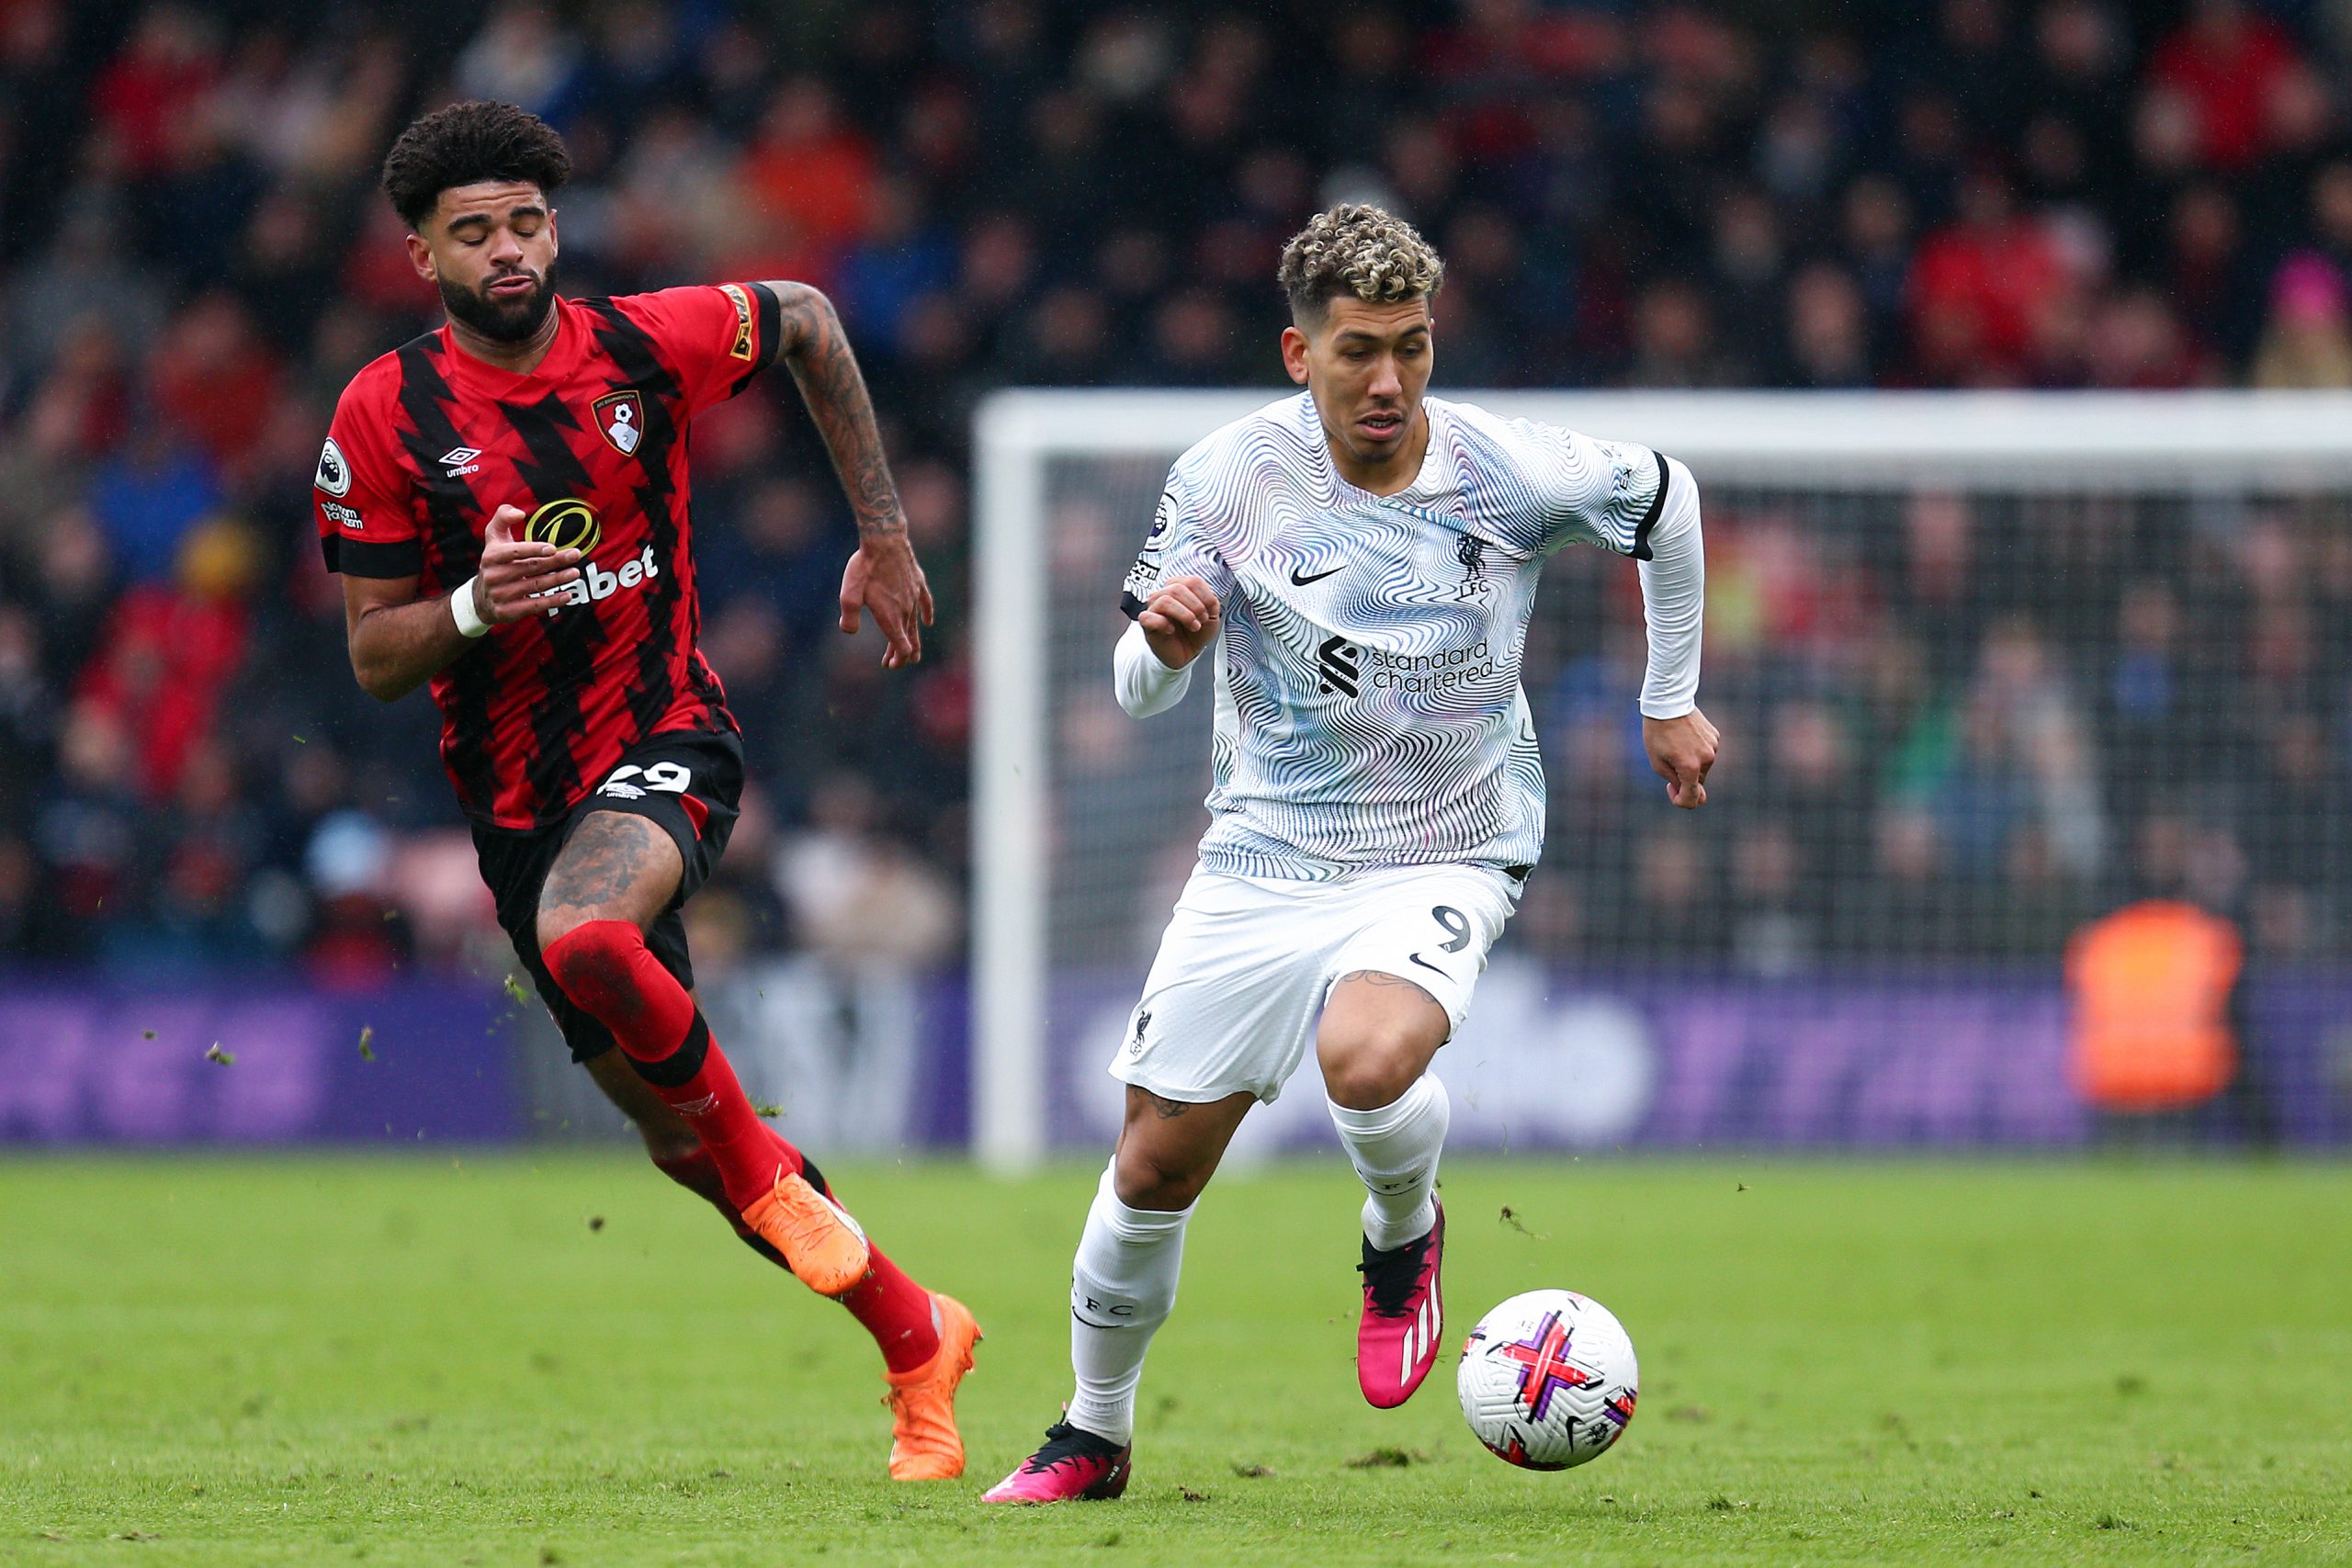 Roberto Firmino of Liverpool runs with the ball whilst under pressure from Philip Billing of AFC Bournemouth during his team's 1-0 loss away from home.